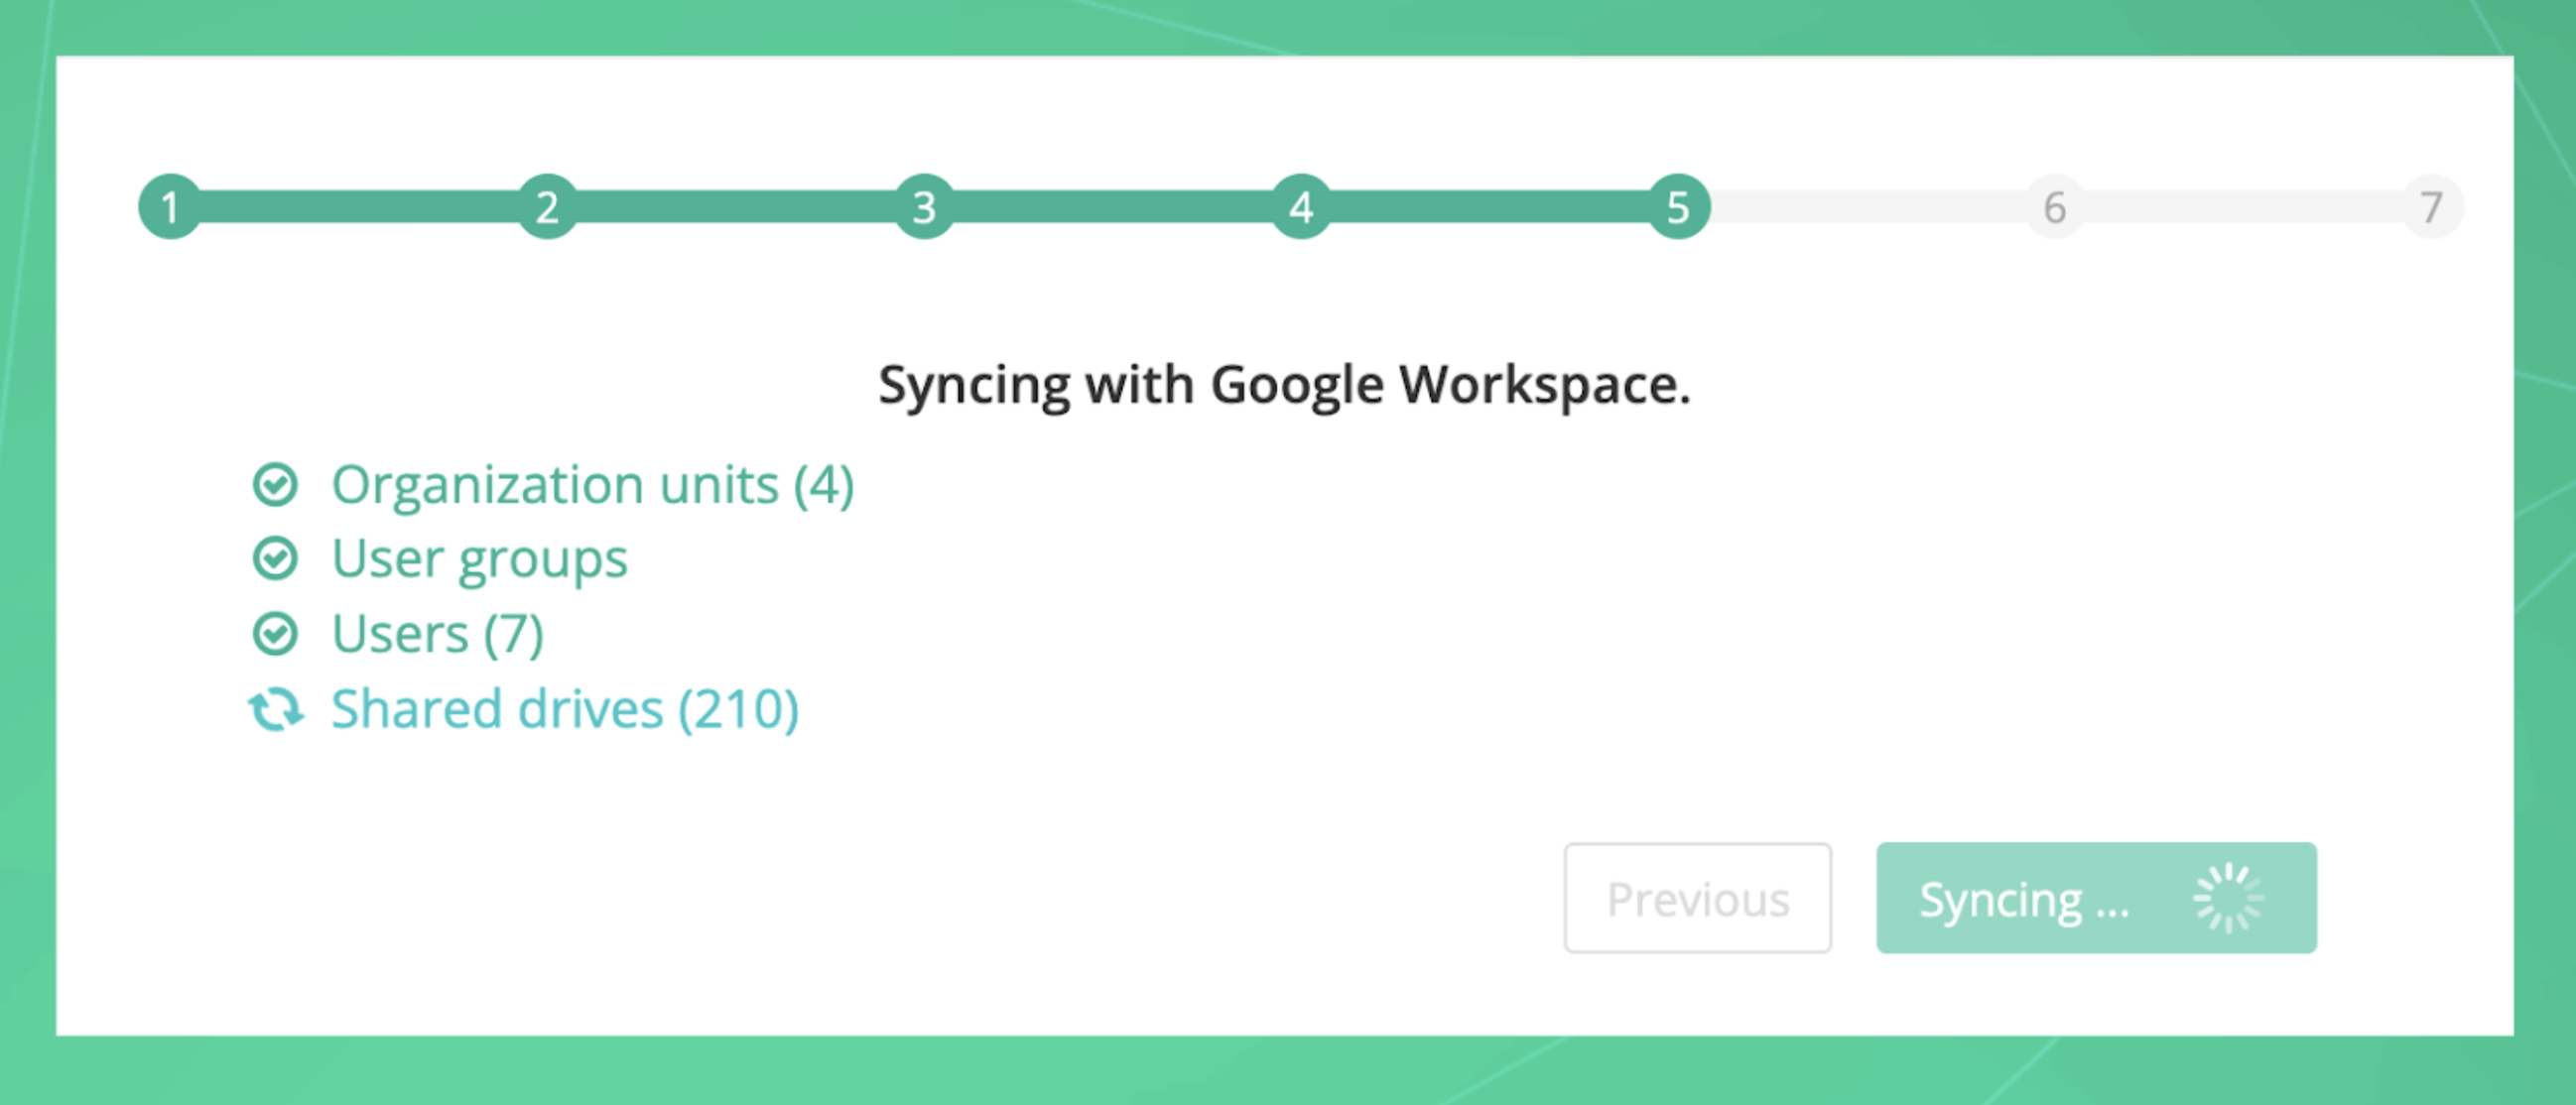 Sync with Google Workspace